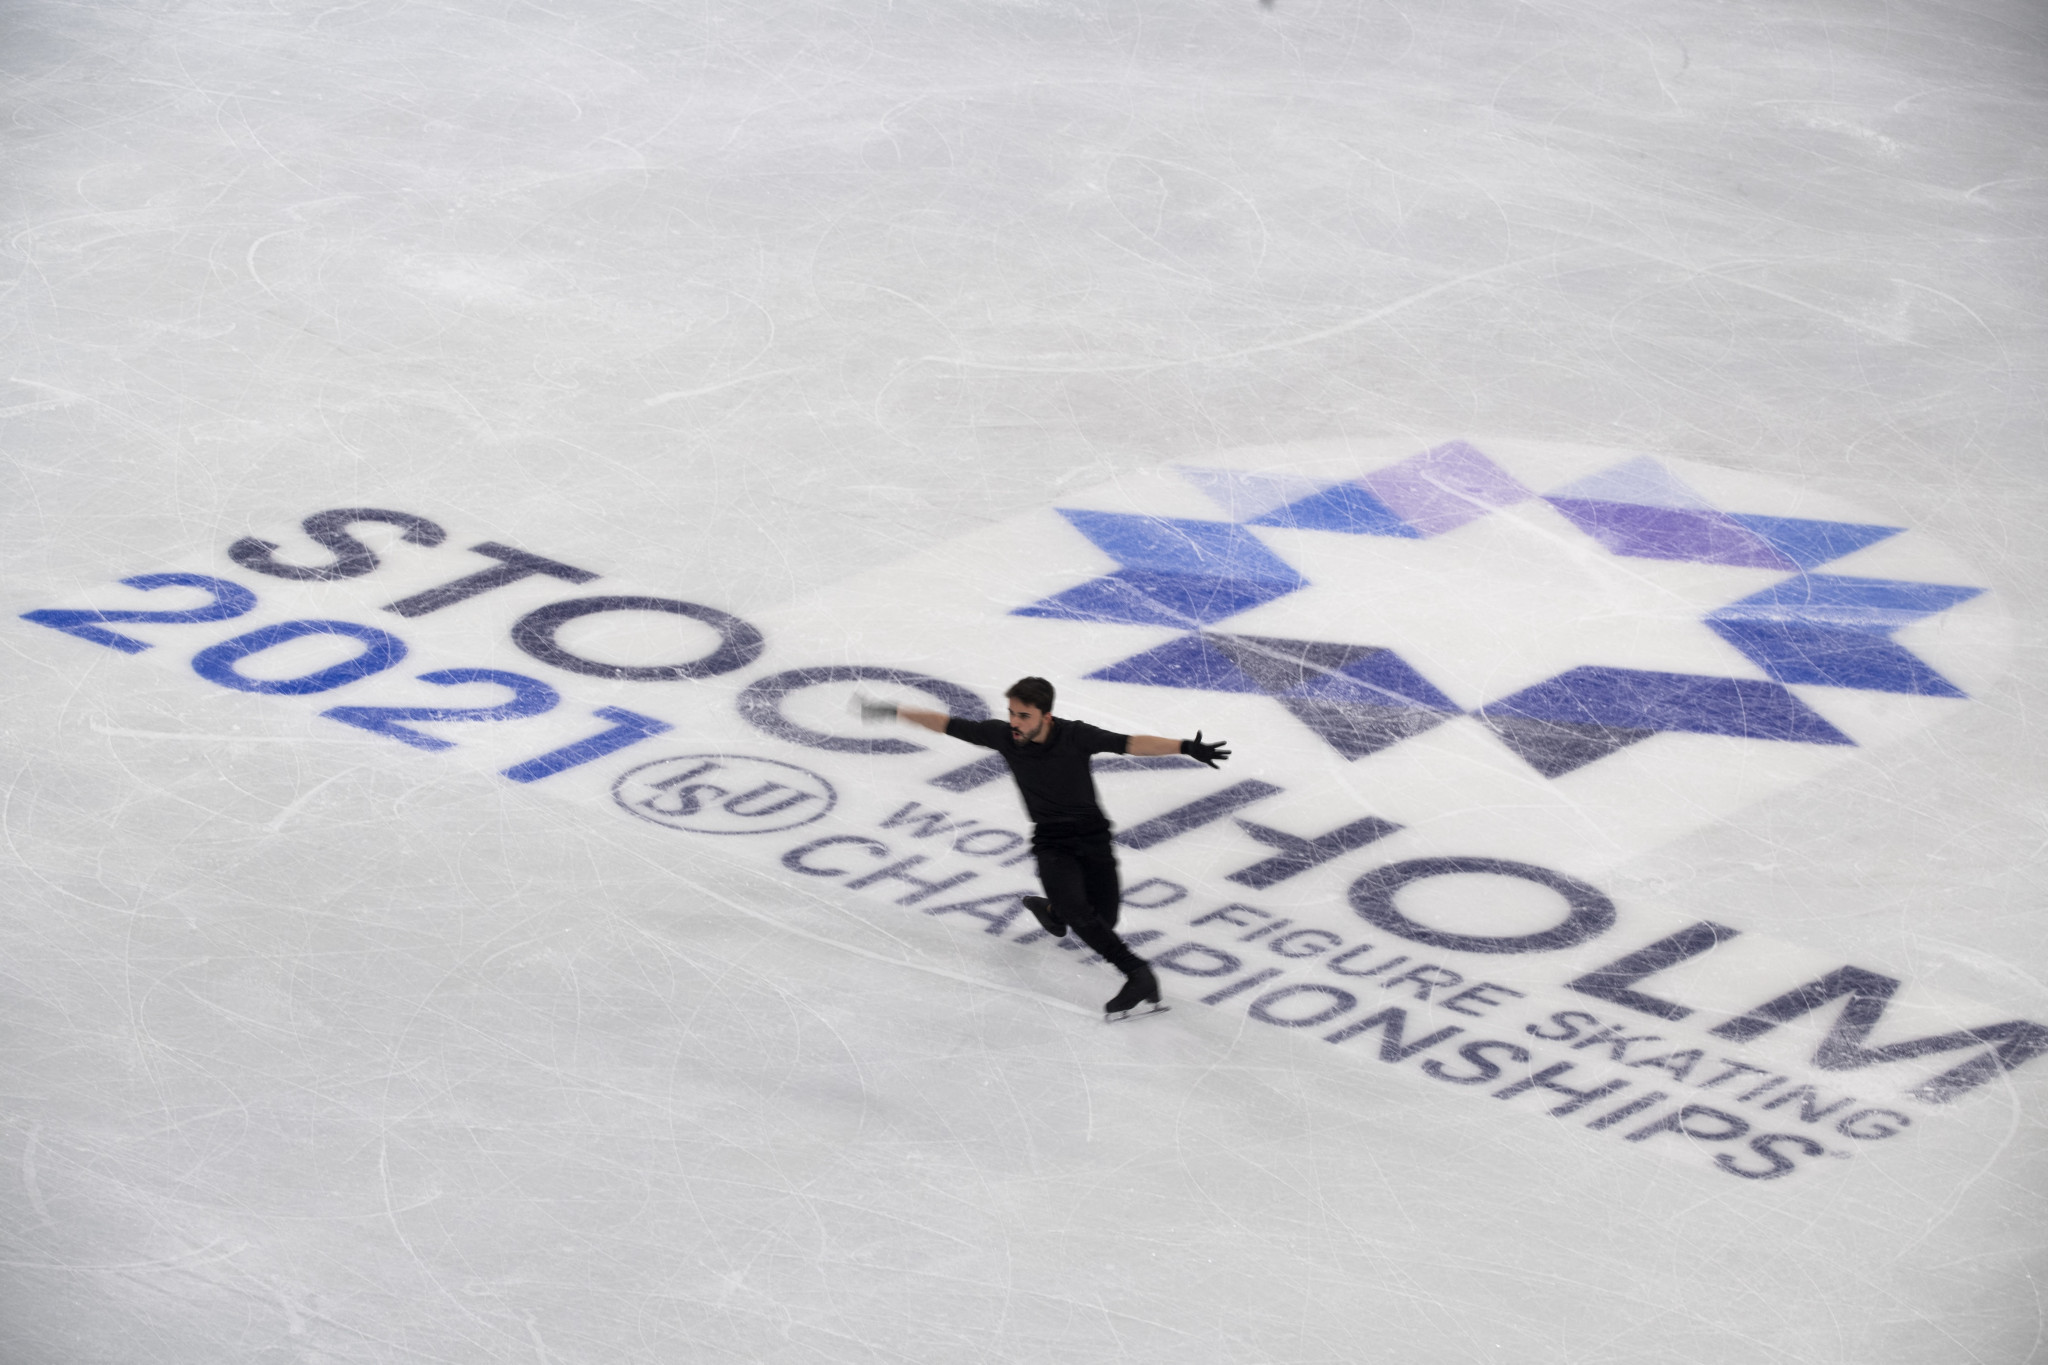 The ISU faced criticism over the strength of its COVID-19 protocols ahead of the World Figure Skating Championships ©Getty Images